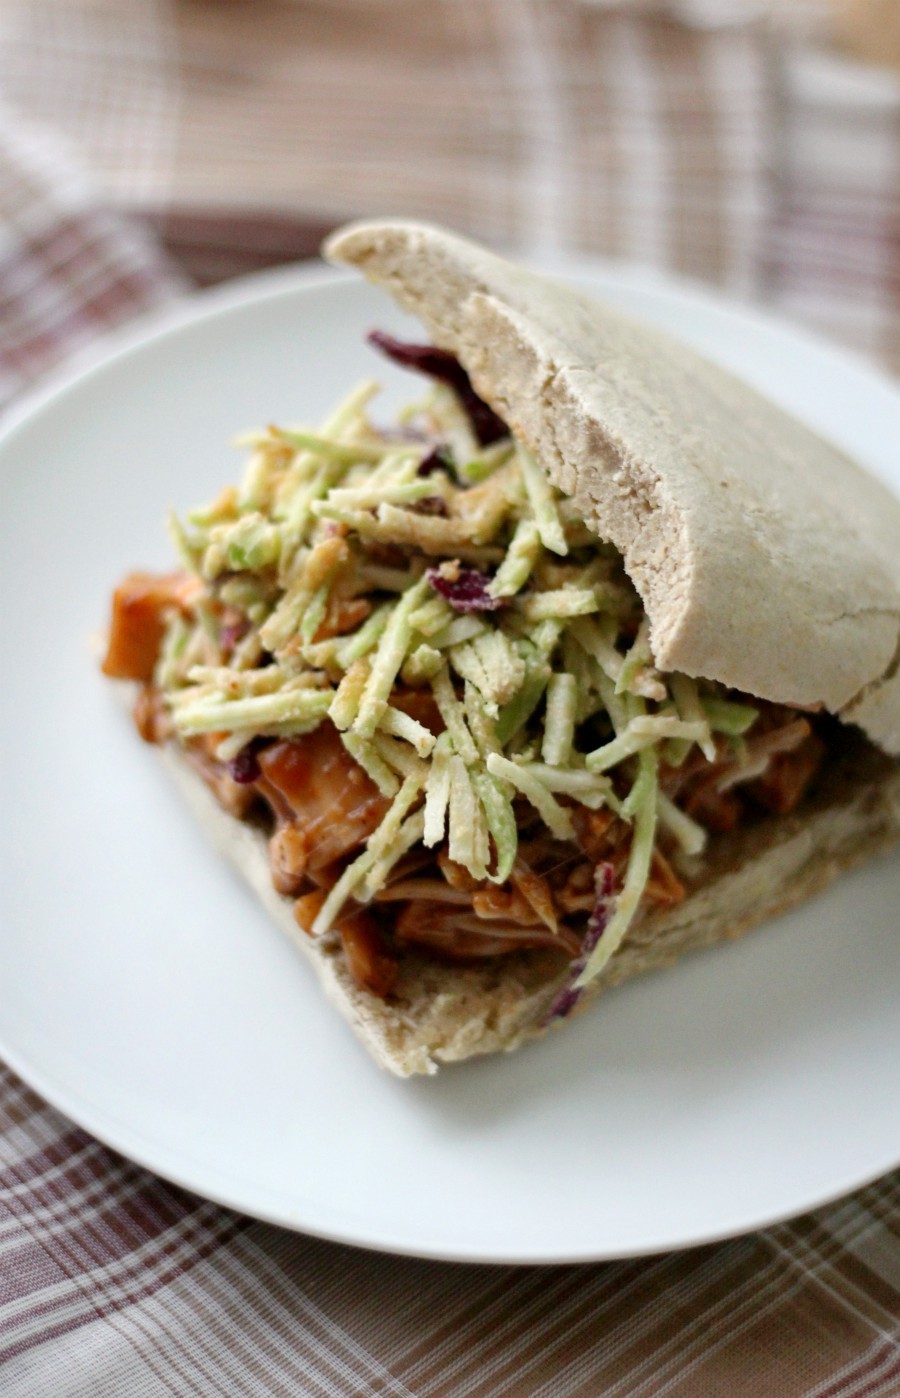 Pulled BBQ Jackfruit Sandwiches with Tahini Slaw (Gluten-Free, Vegan) | Strength and Sunshine @RebeccaGF666 A healthy & delicious meatless recipe that will have you forgetting about the meat! Pulled BBQ Jackfruit Sandwiches with Tahini Slaw that are gluten-free, vegan, & top-8 allergy-free! Great for a quick & easy plant-based weeknight dinner! #jackfruit #bbq #sandwiches #glutenfree #vegan